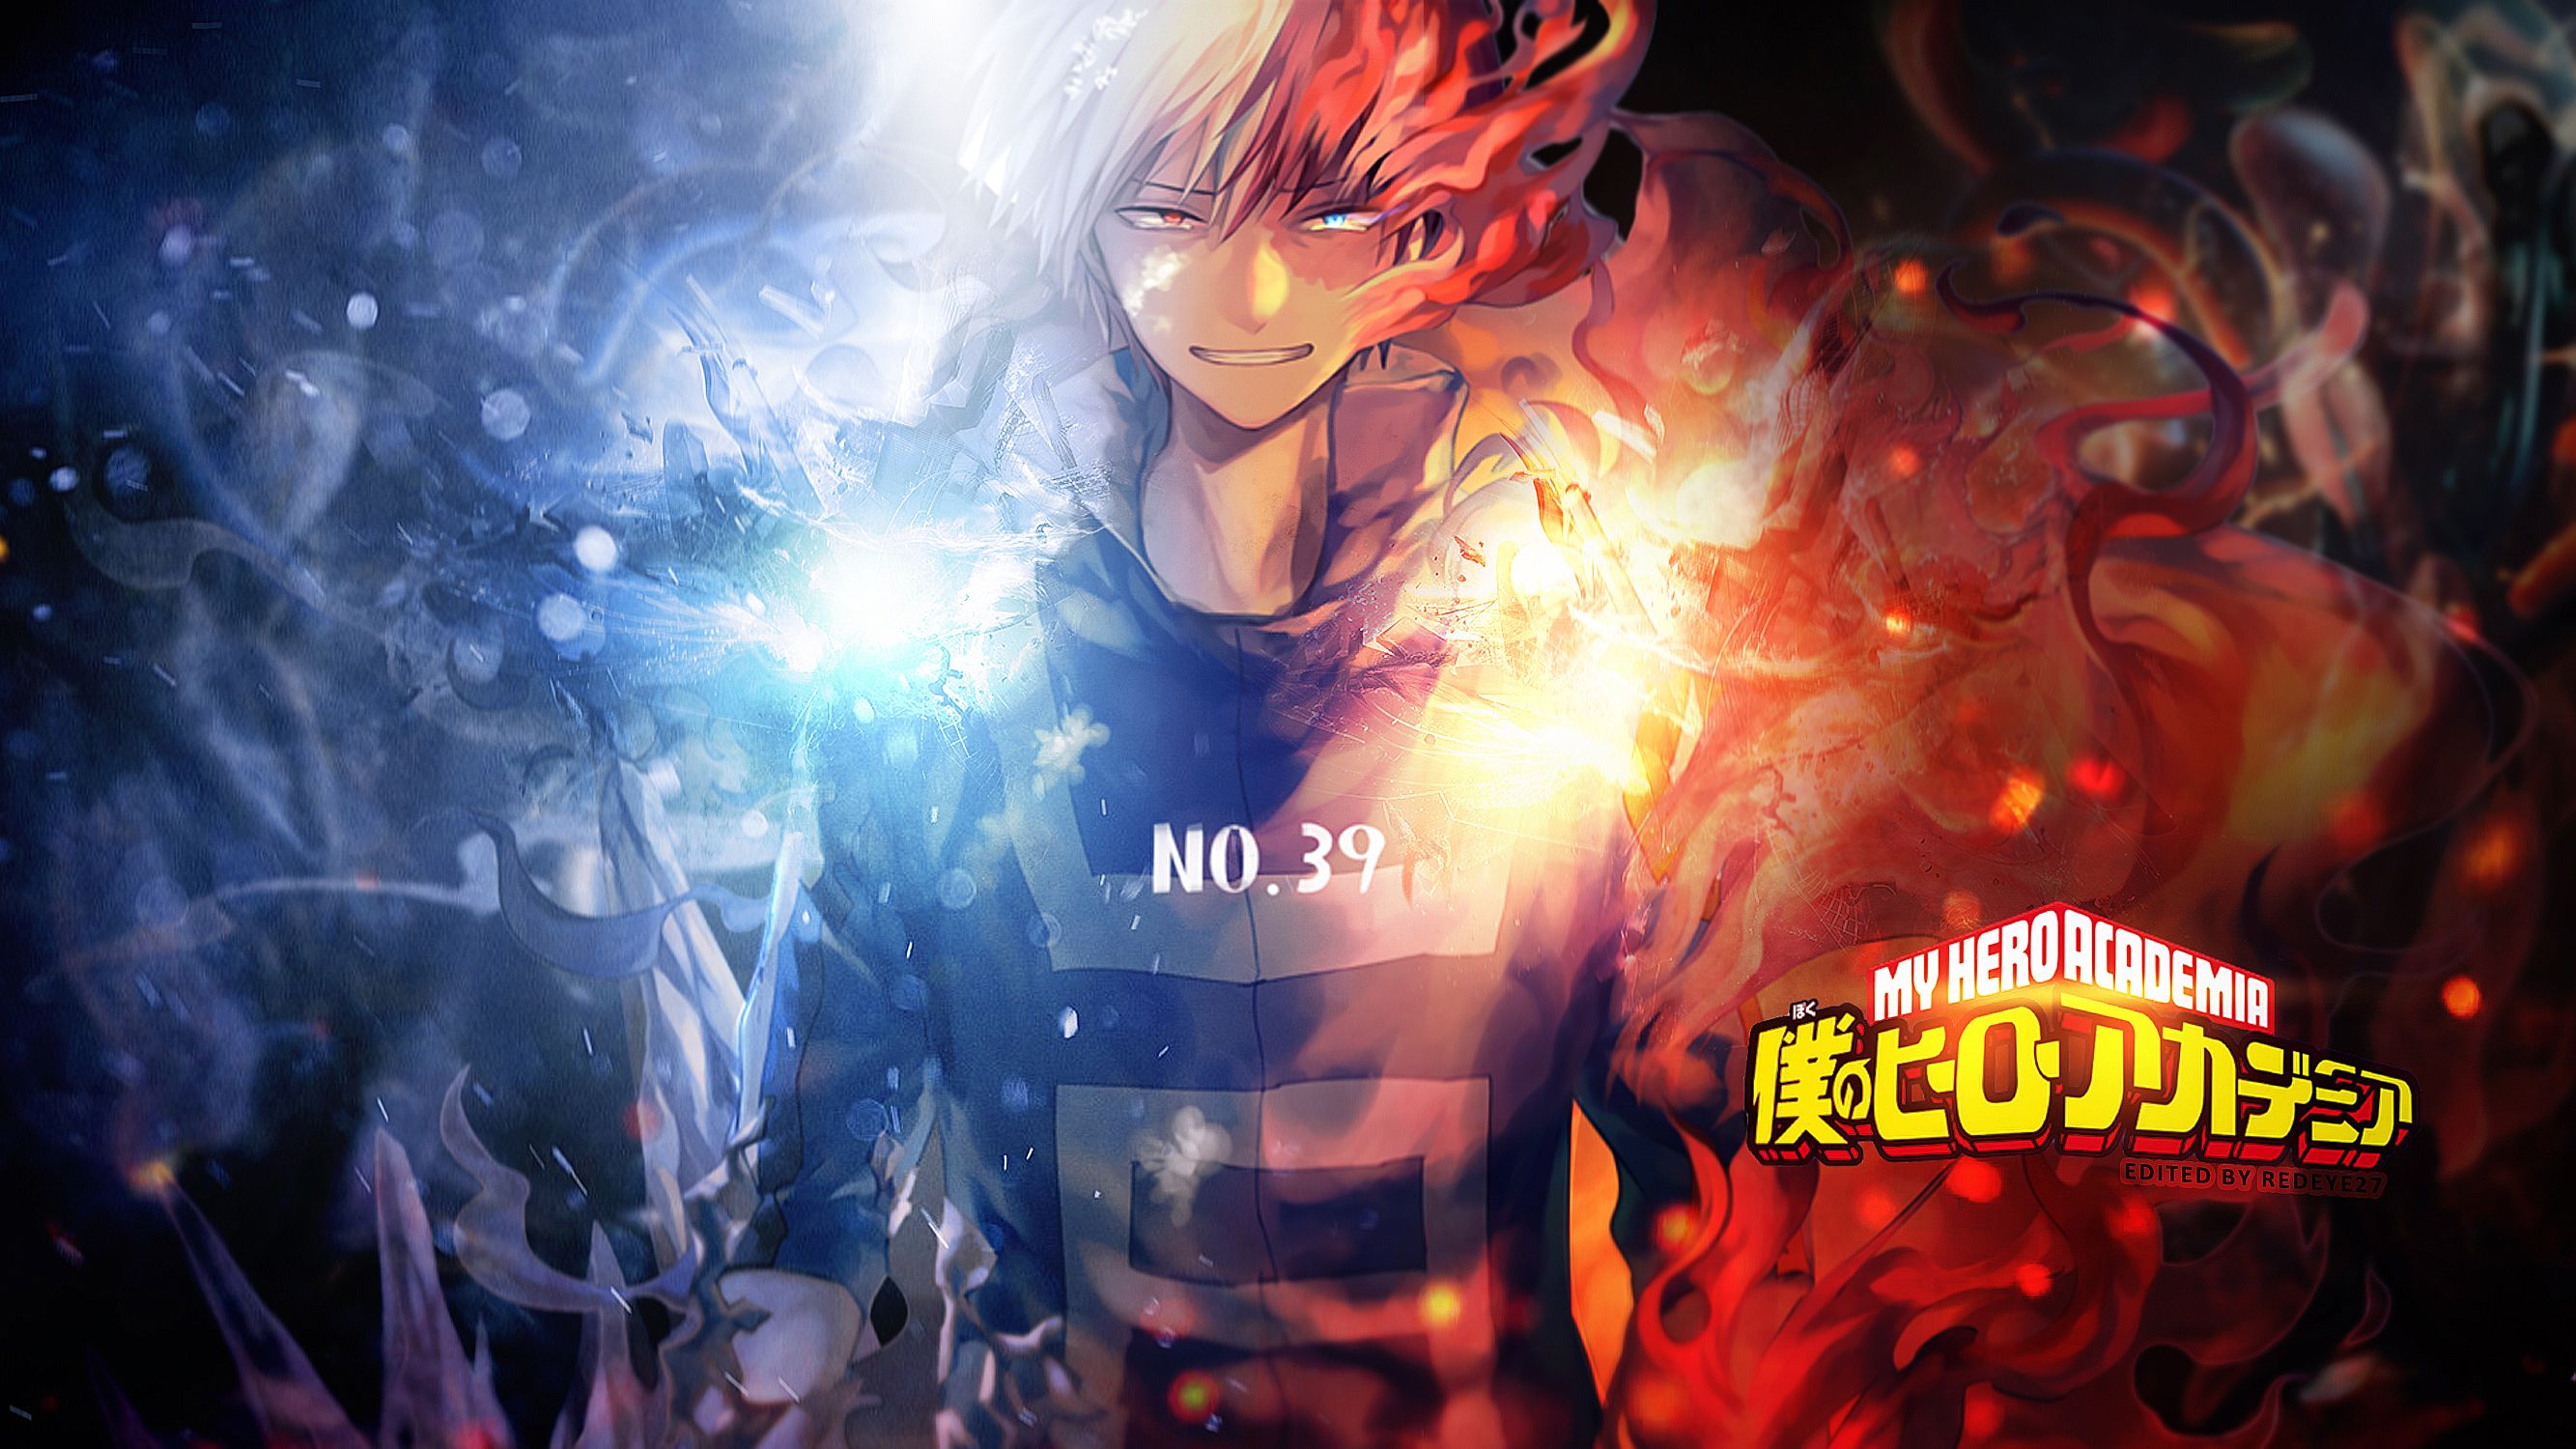 Download wallpaper from anime My Hero Academia with tags: Lock